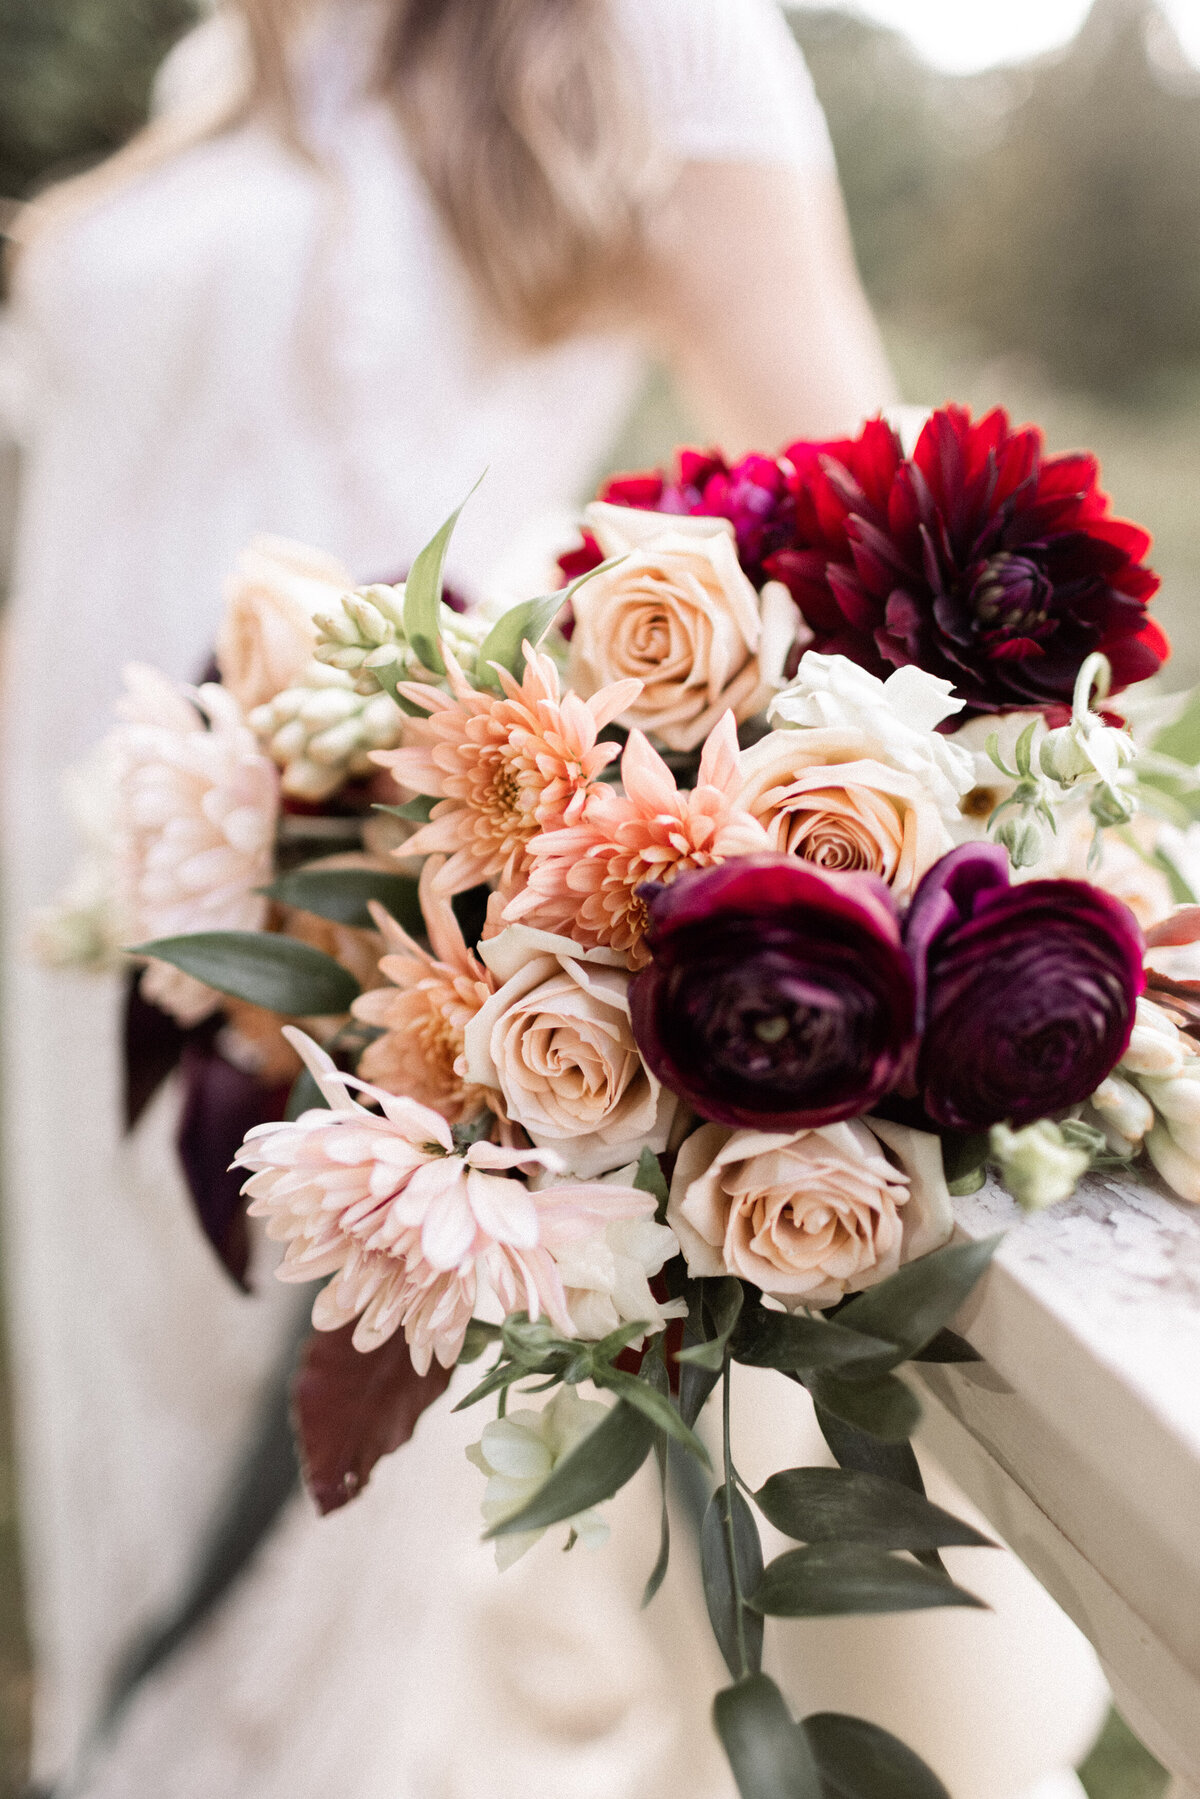 A bridal bouquet of dahlias, roses, chrysanthemums and tuberose in autumn colors